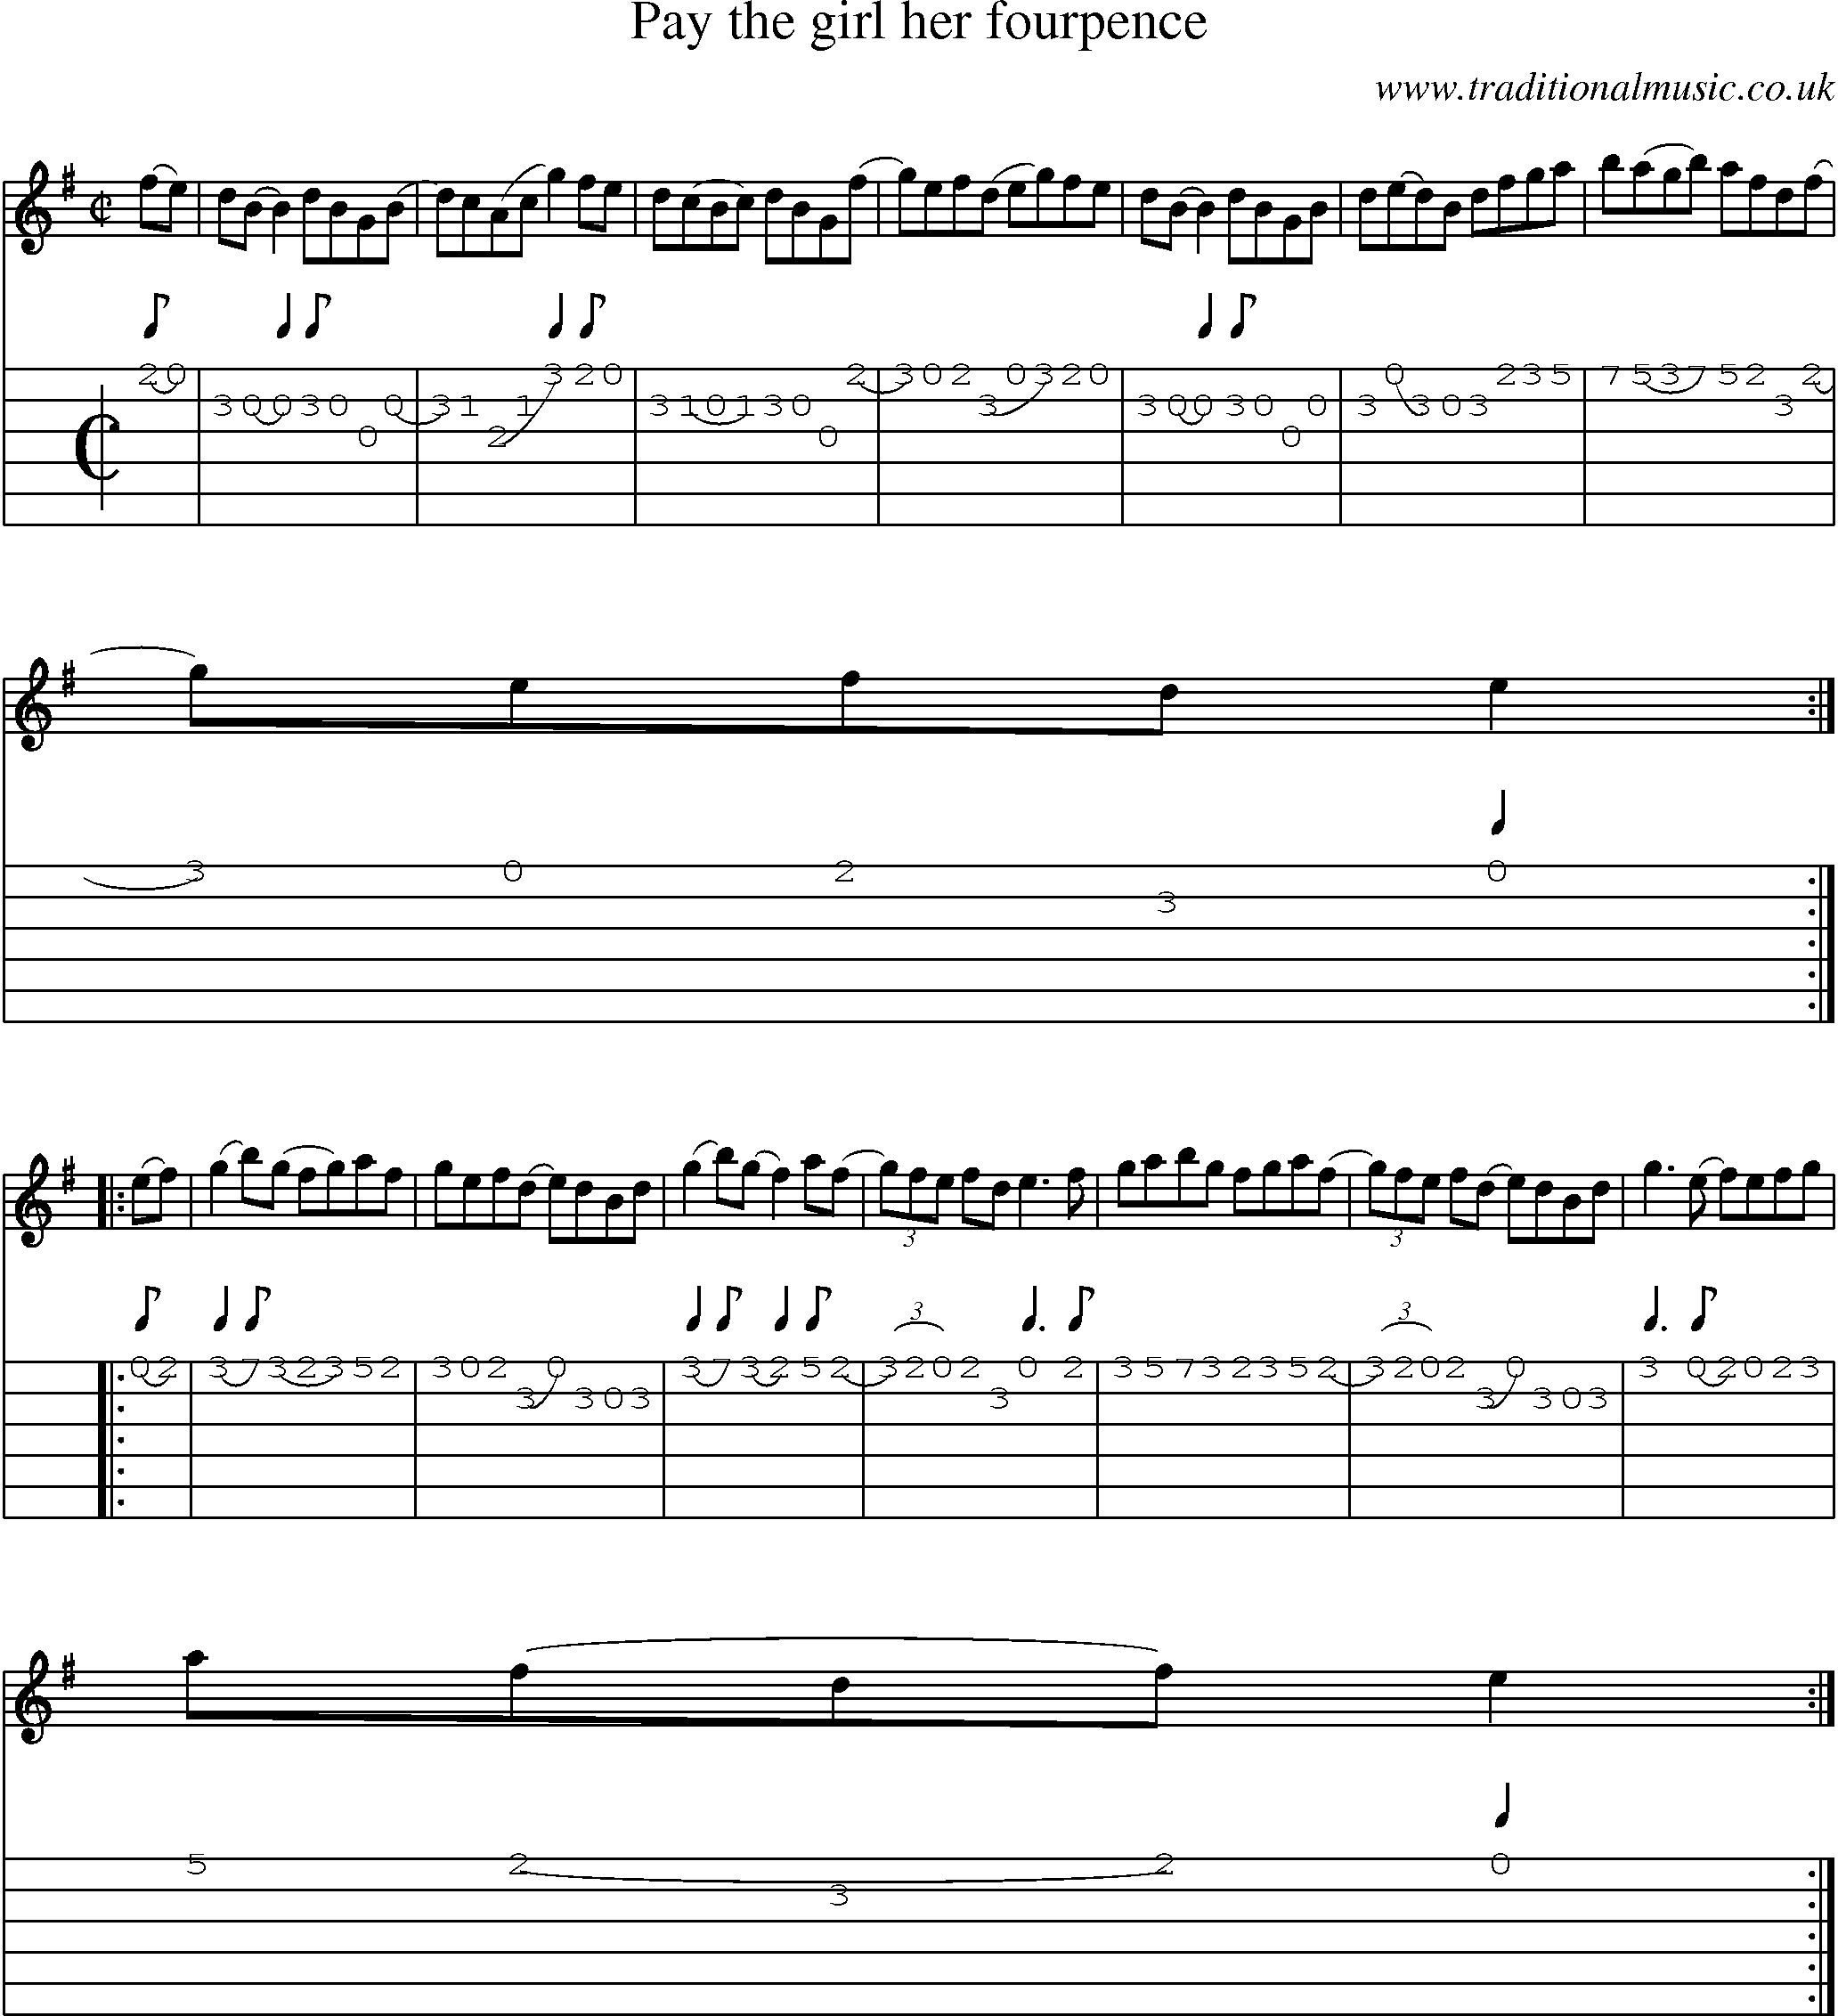 Music Score and Guitar Tabs for Pay The Girl Her Fourpence